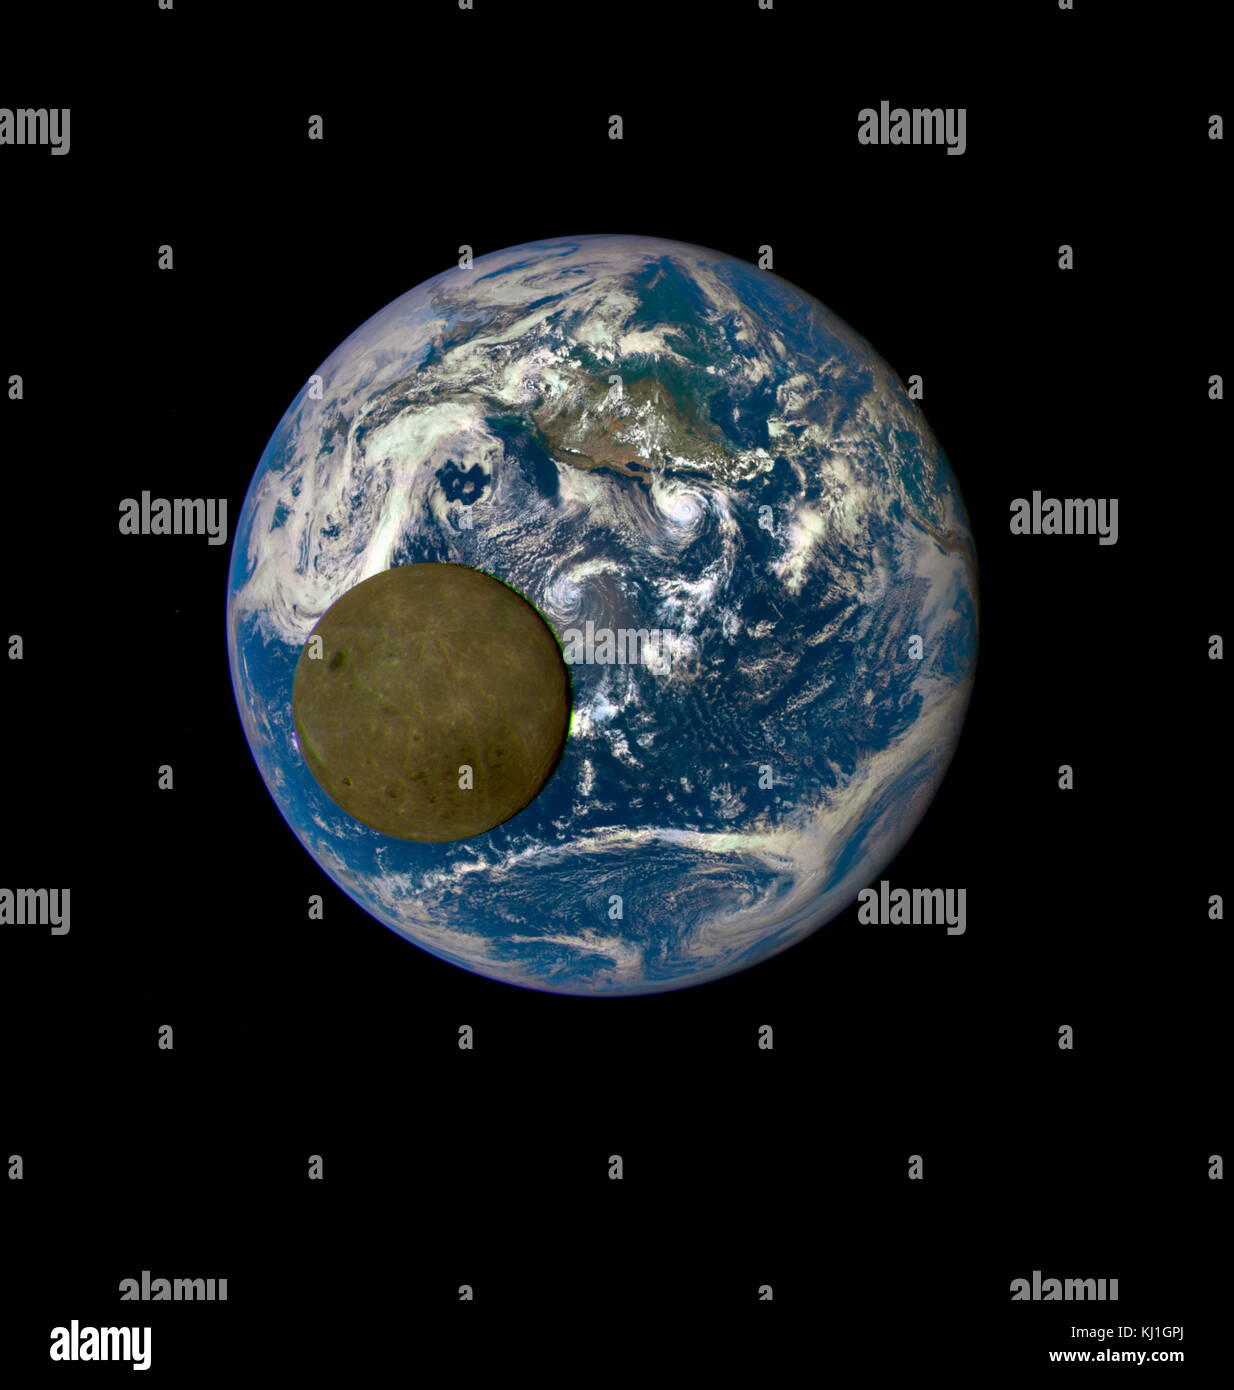 2015 The Deep Space Climate Observatory Dscovr Spacecraft S Earth Polychromatic Imaging Camera Epic Captured This View Of An Apparently Full Moon Crossing In Front Of A Full Earth Stock Photo Alamy